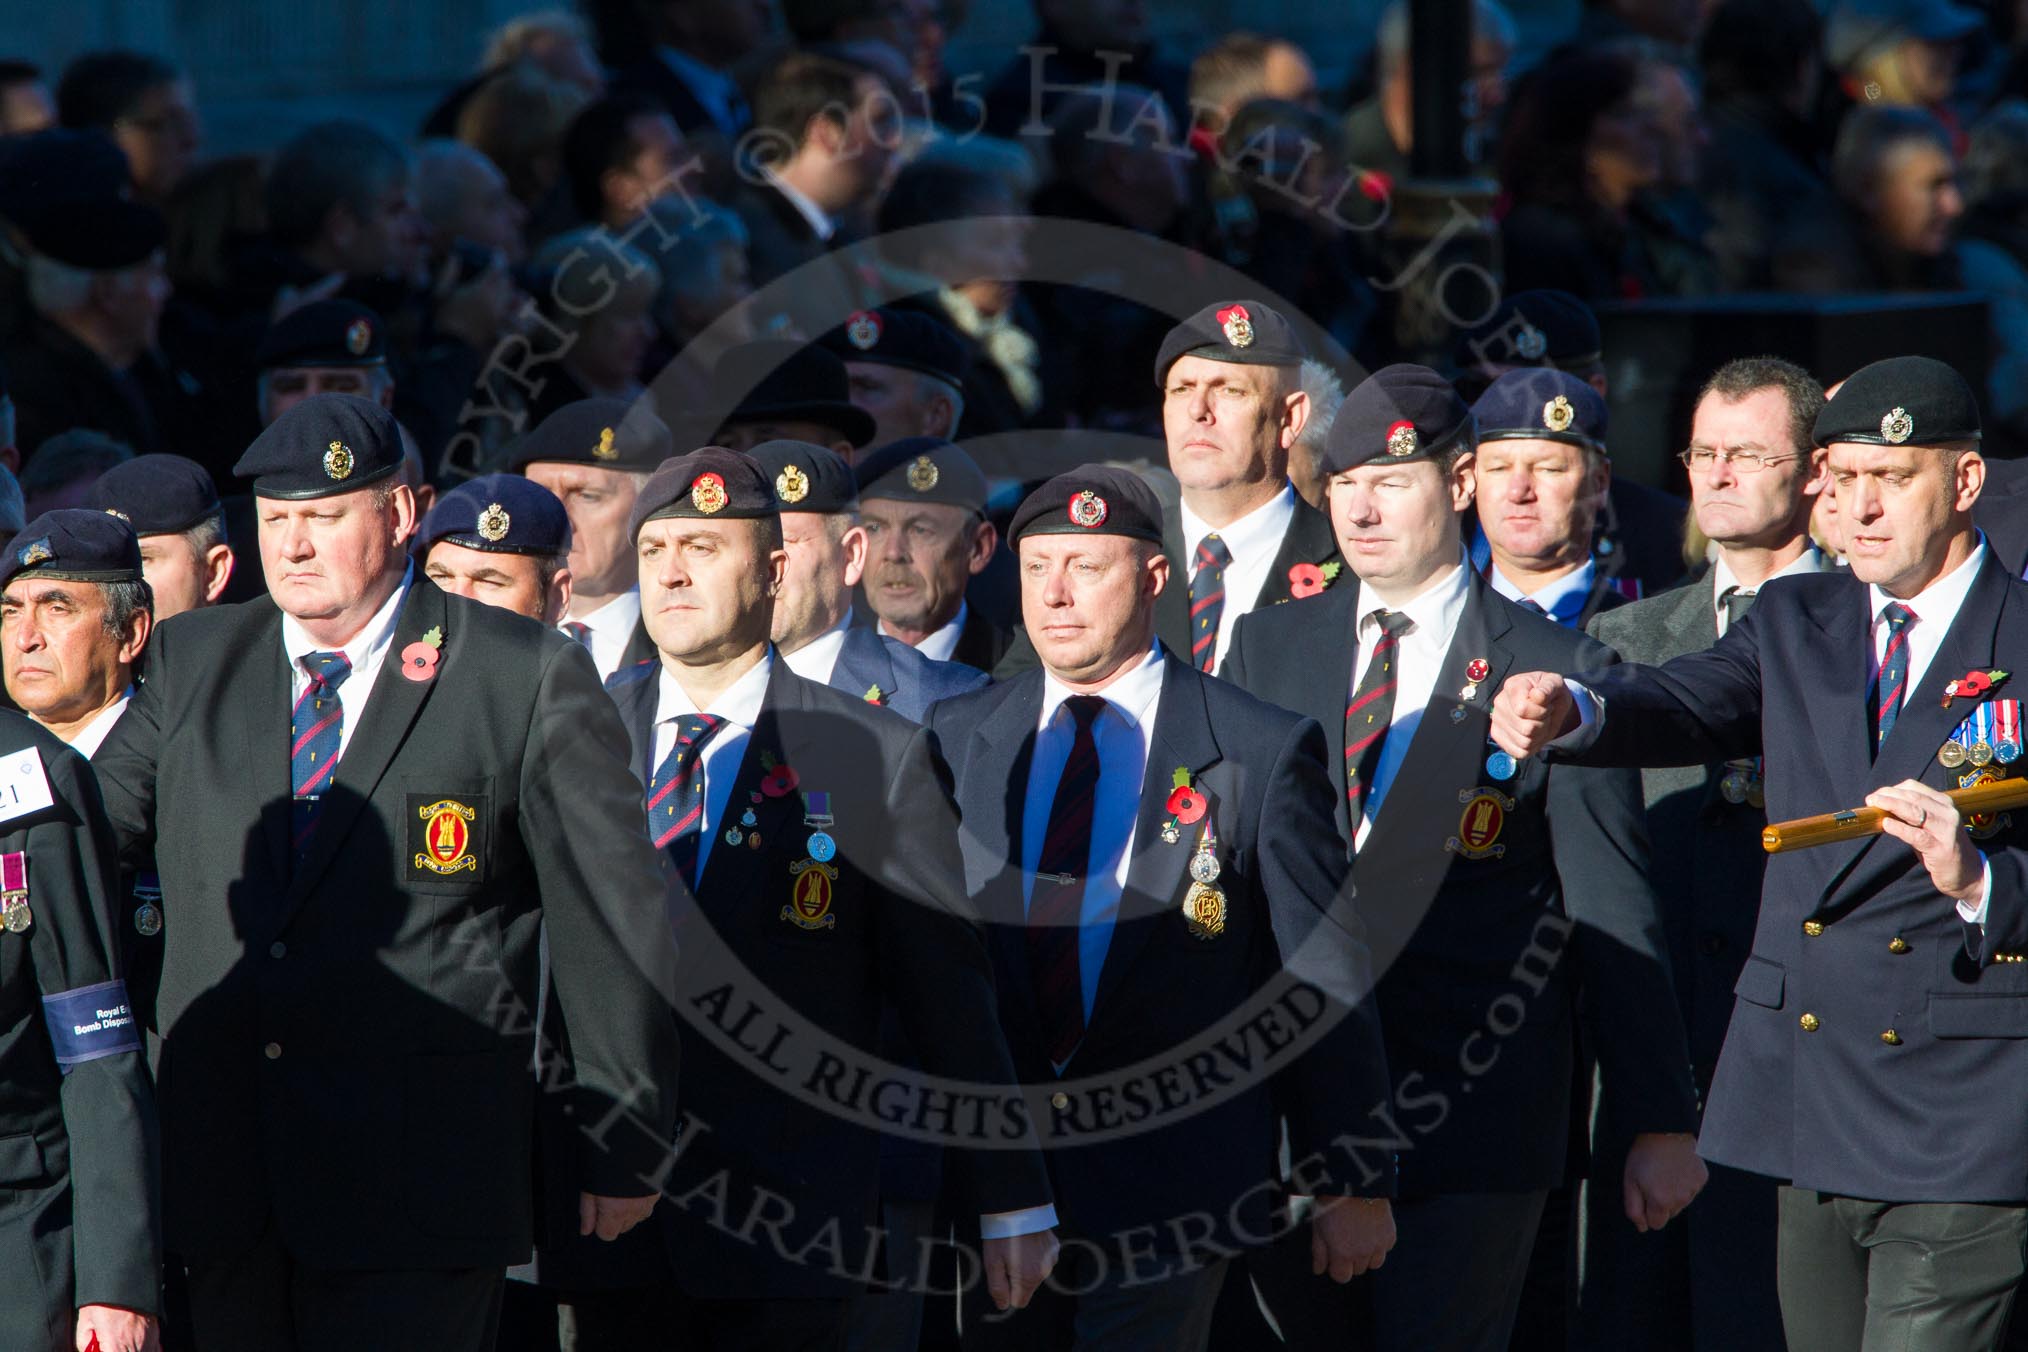 Remembrance Sunday Cenotaph March Past 2013: B21 - Royal Engineers Bomb Disposal Association..
Press stand opposite the Foreign Office building, Whitehall, London SW1,
London,
Greater London,
United Kingdom,
on 10 November 2013 at 12:02, image #1475